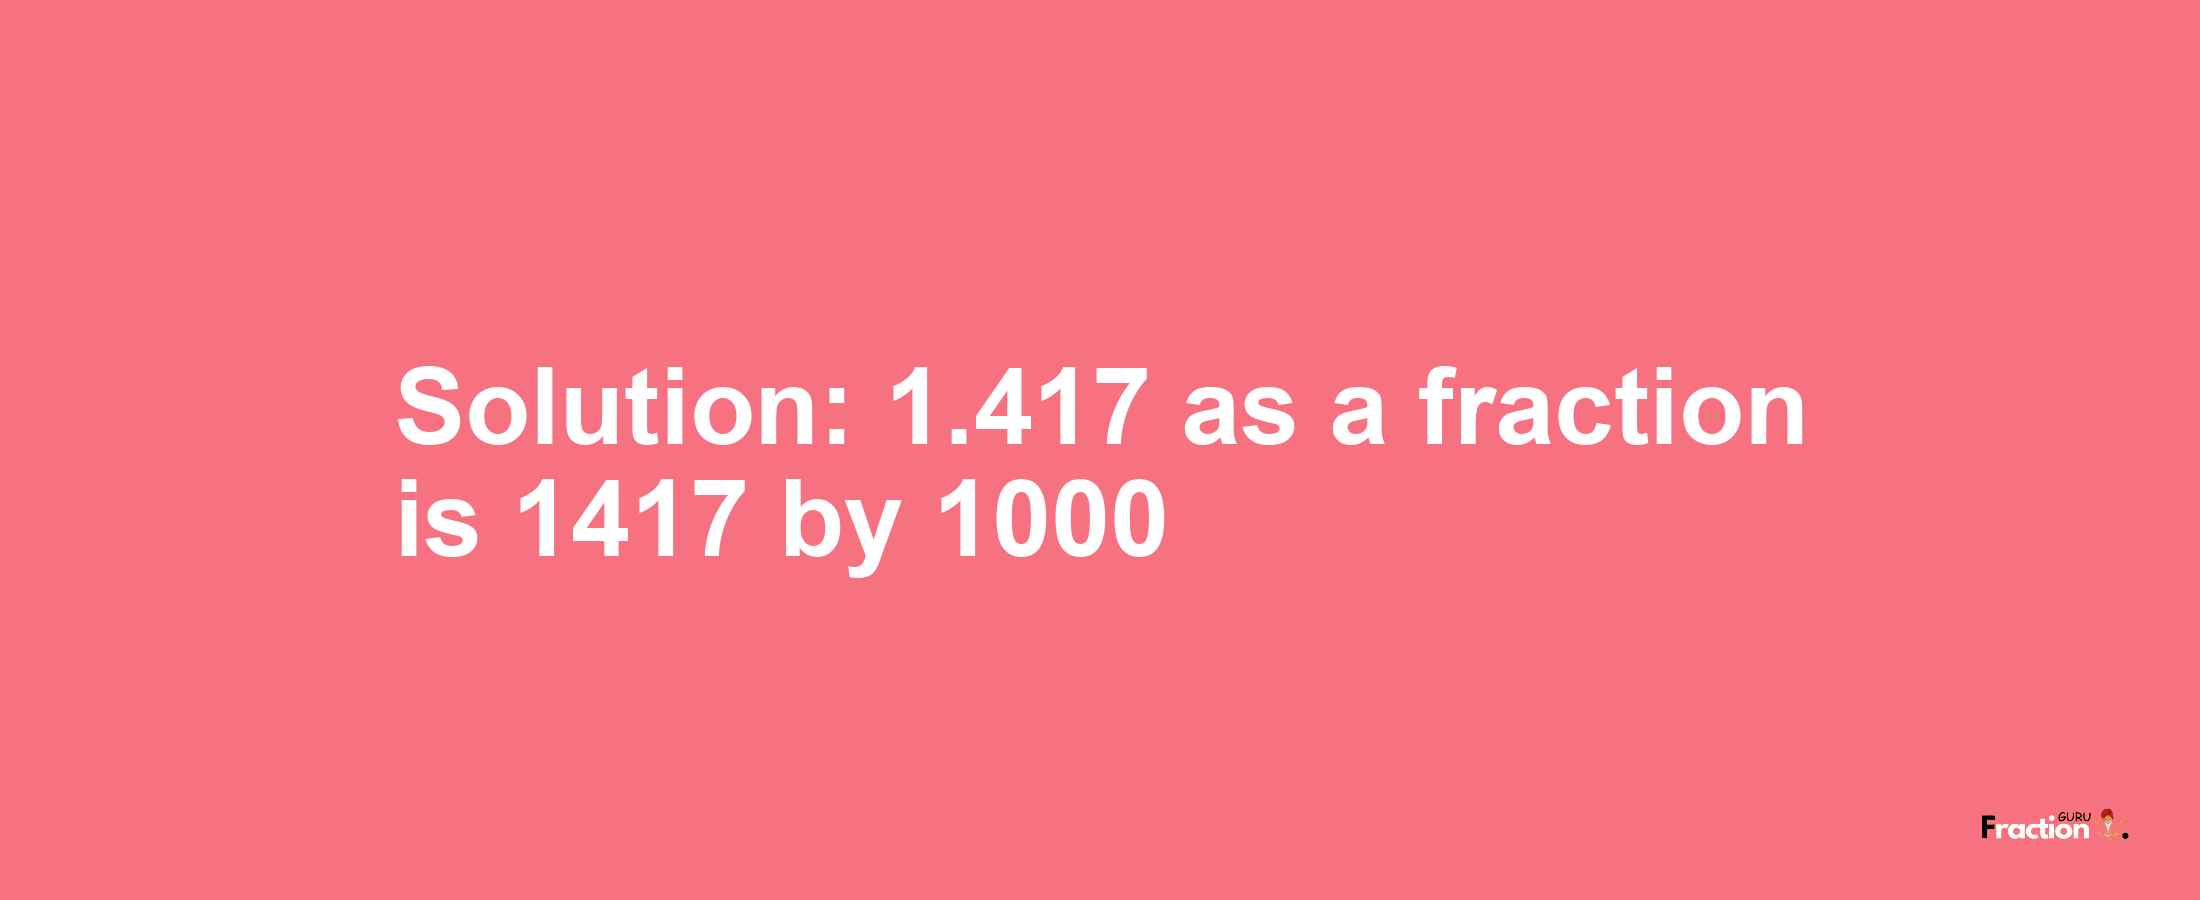 Solution:1.417 as a fraction is 1417/1000